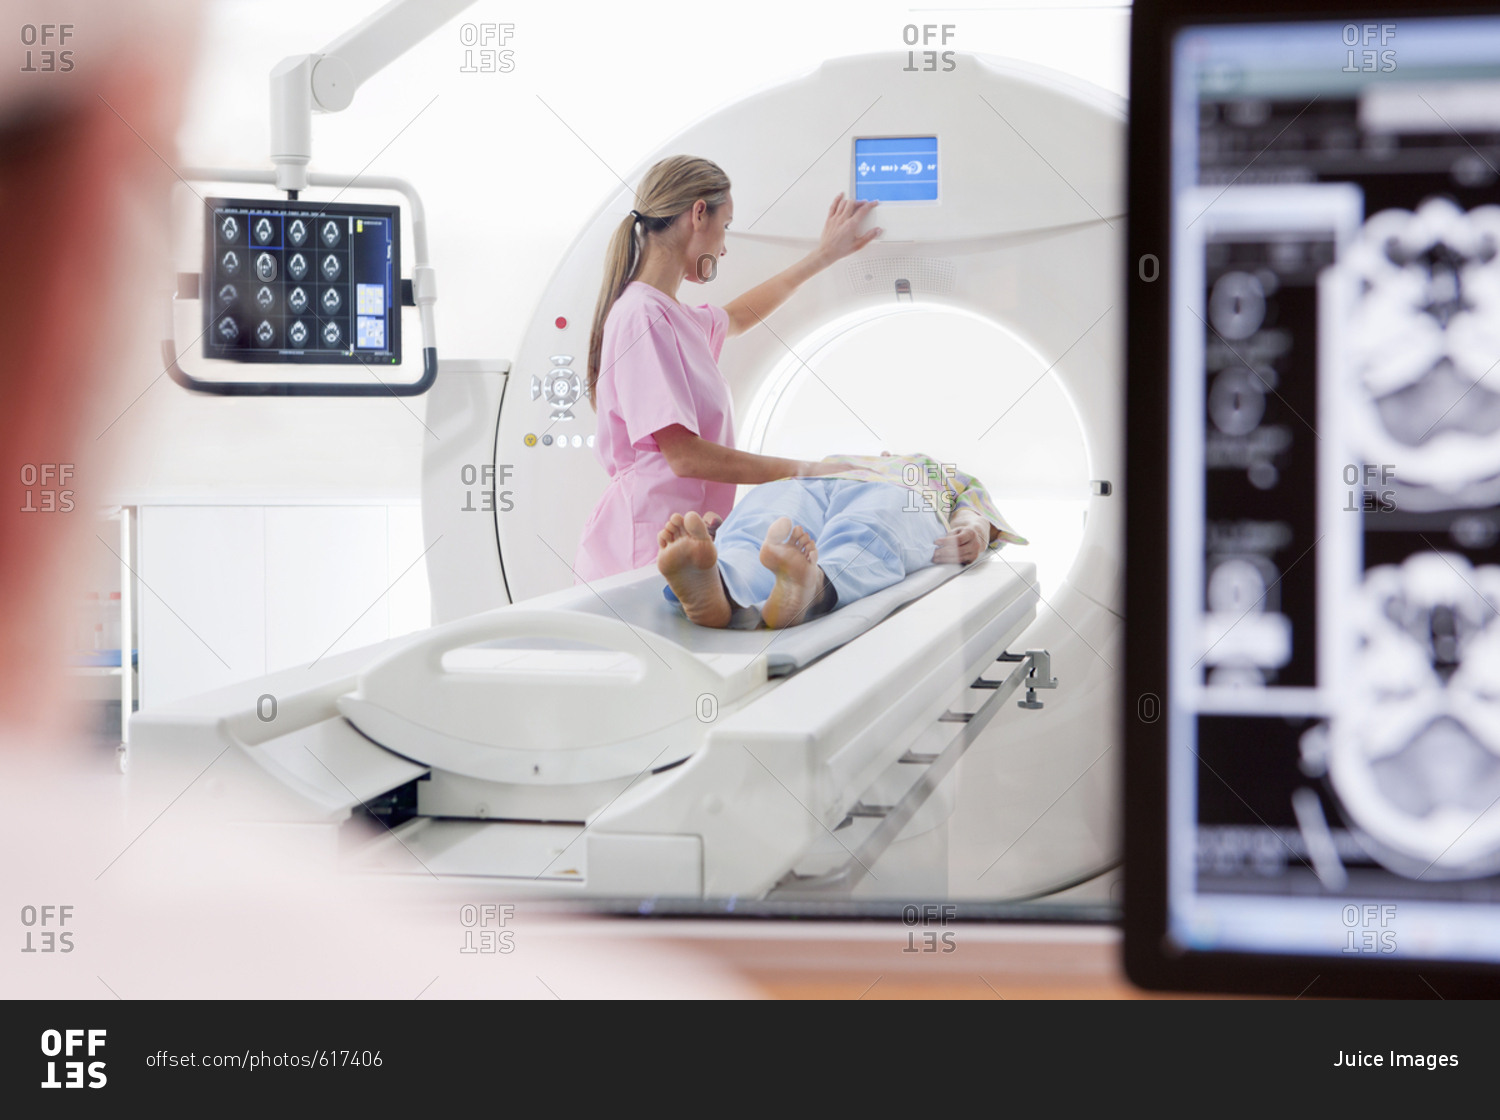 Nurse technician and patient at CT scanner in hospital with digital brain scan in foreground